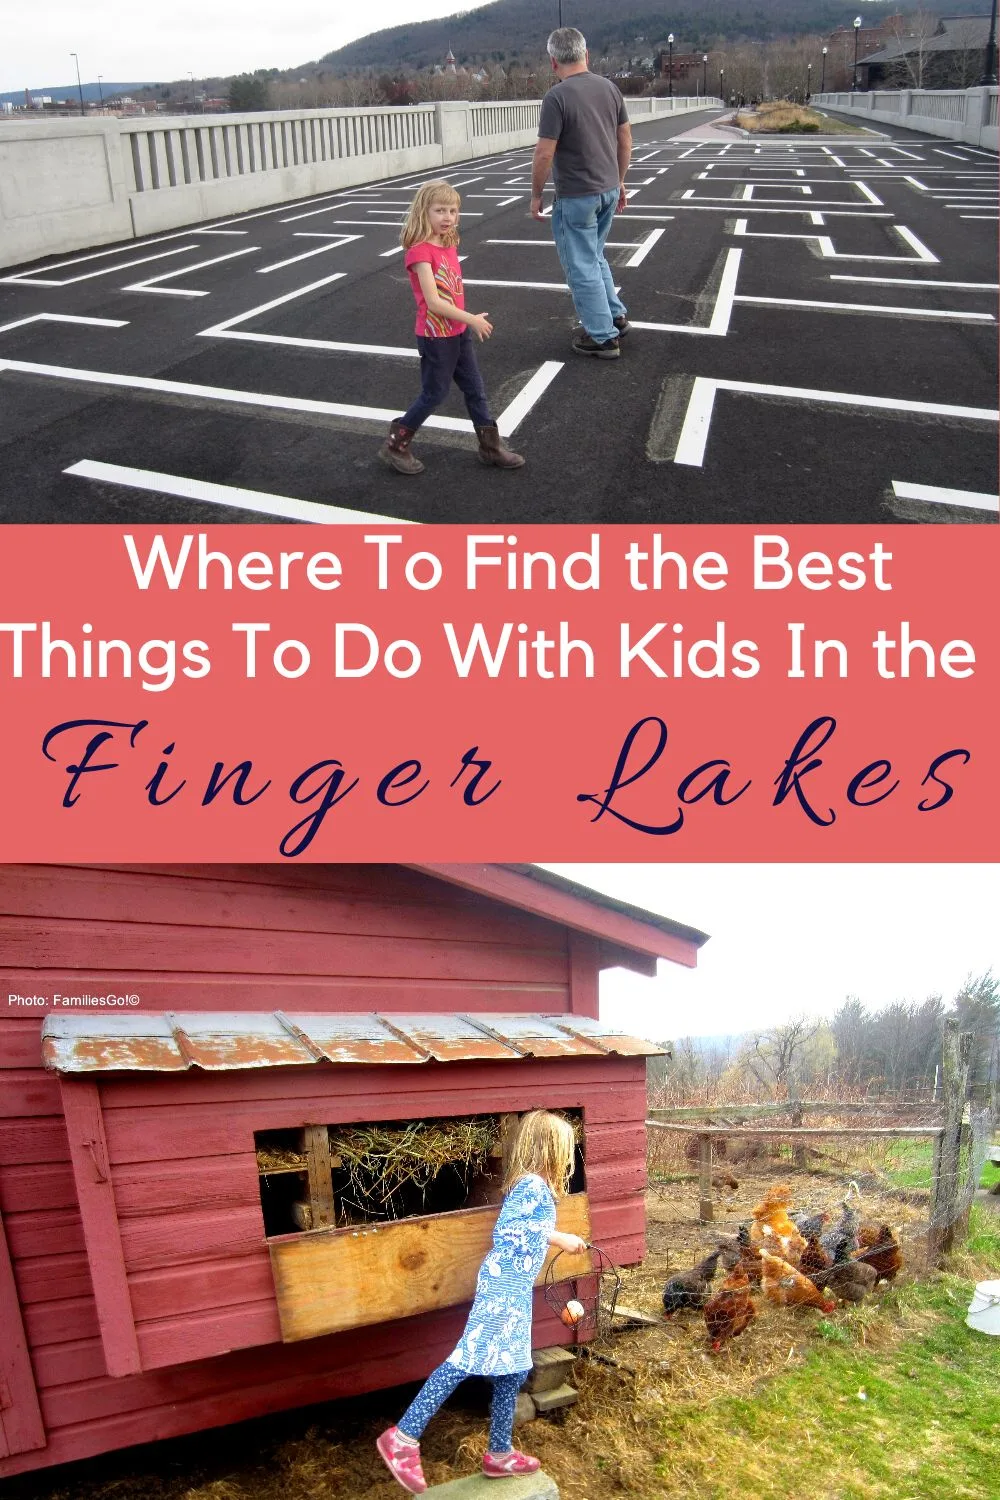 we offer 12 things to do with kids in new york's finger lakes region including hiking, racetrack driving and even visiting wineries. 